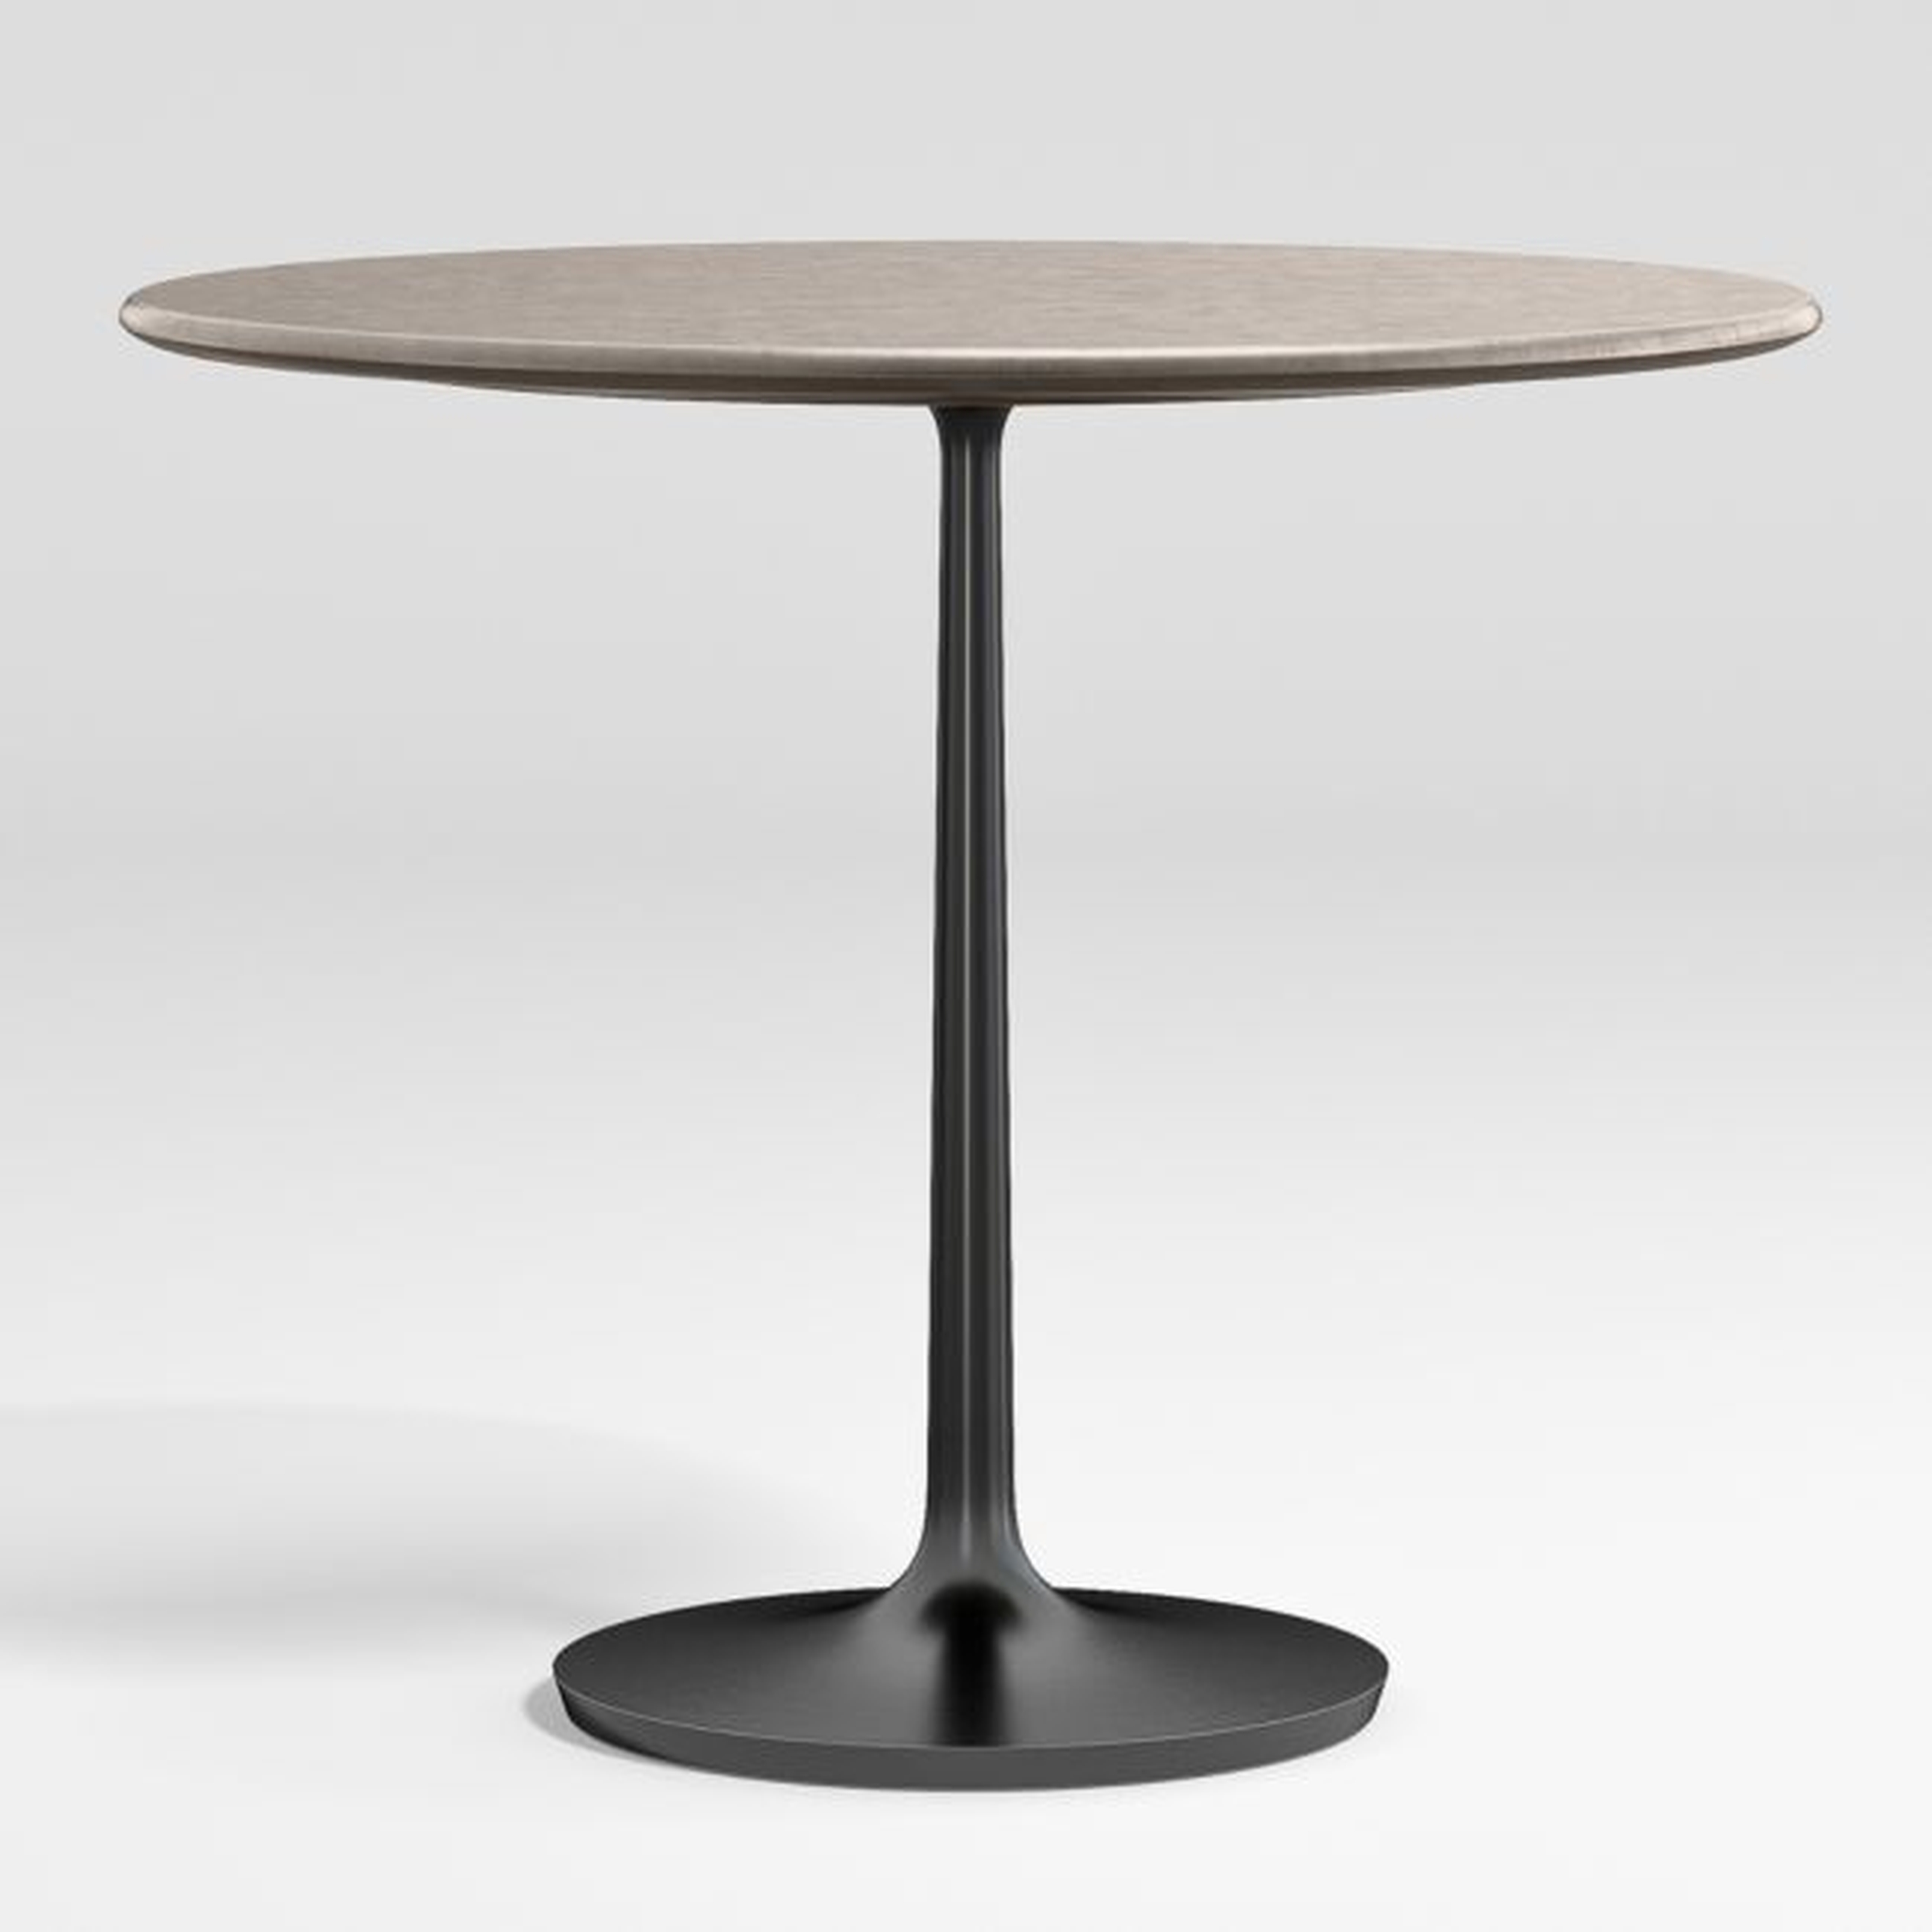 Nero 36" Concrete Dining Table with Matte Black Base - Crate and Barrel